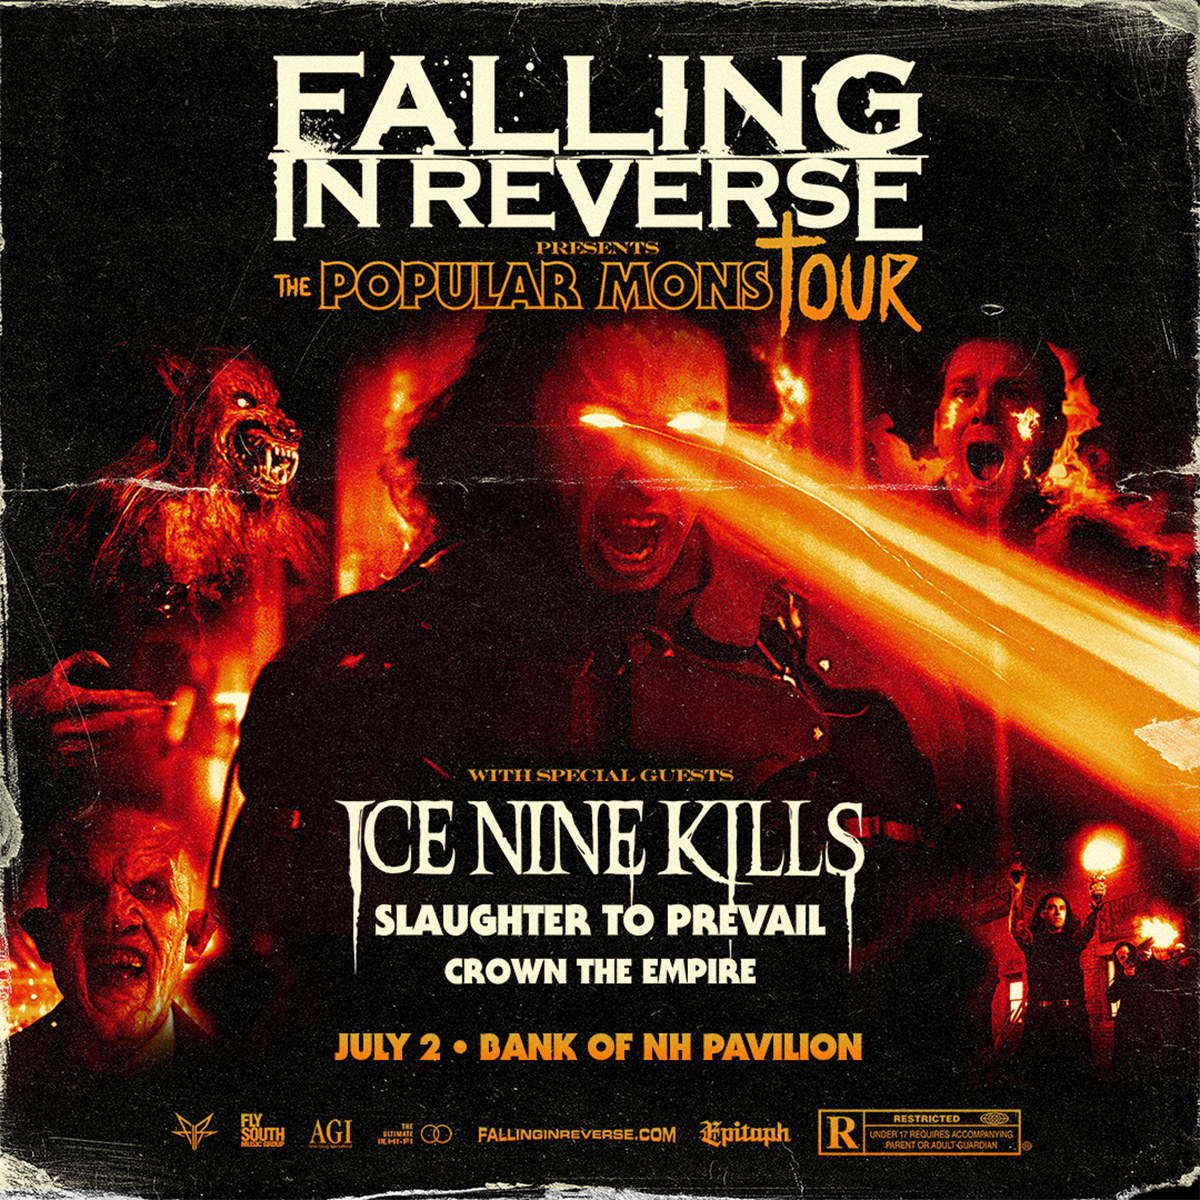 Last Chance To Win Tickets To Falling In Reverse At The Bank Of NH Pavilion!